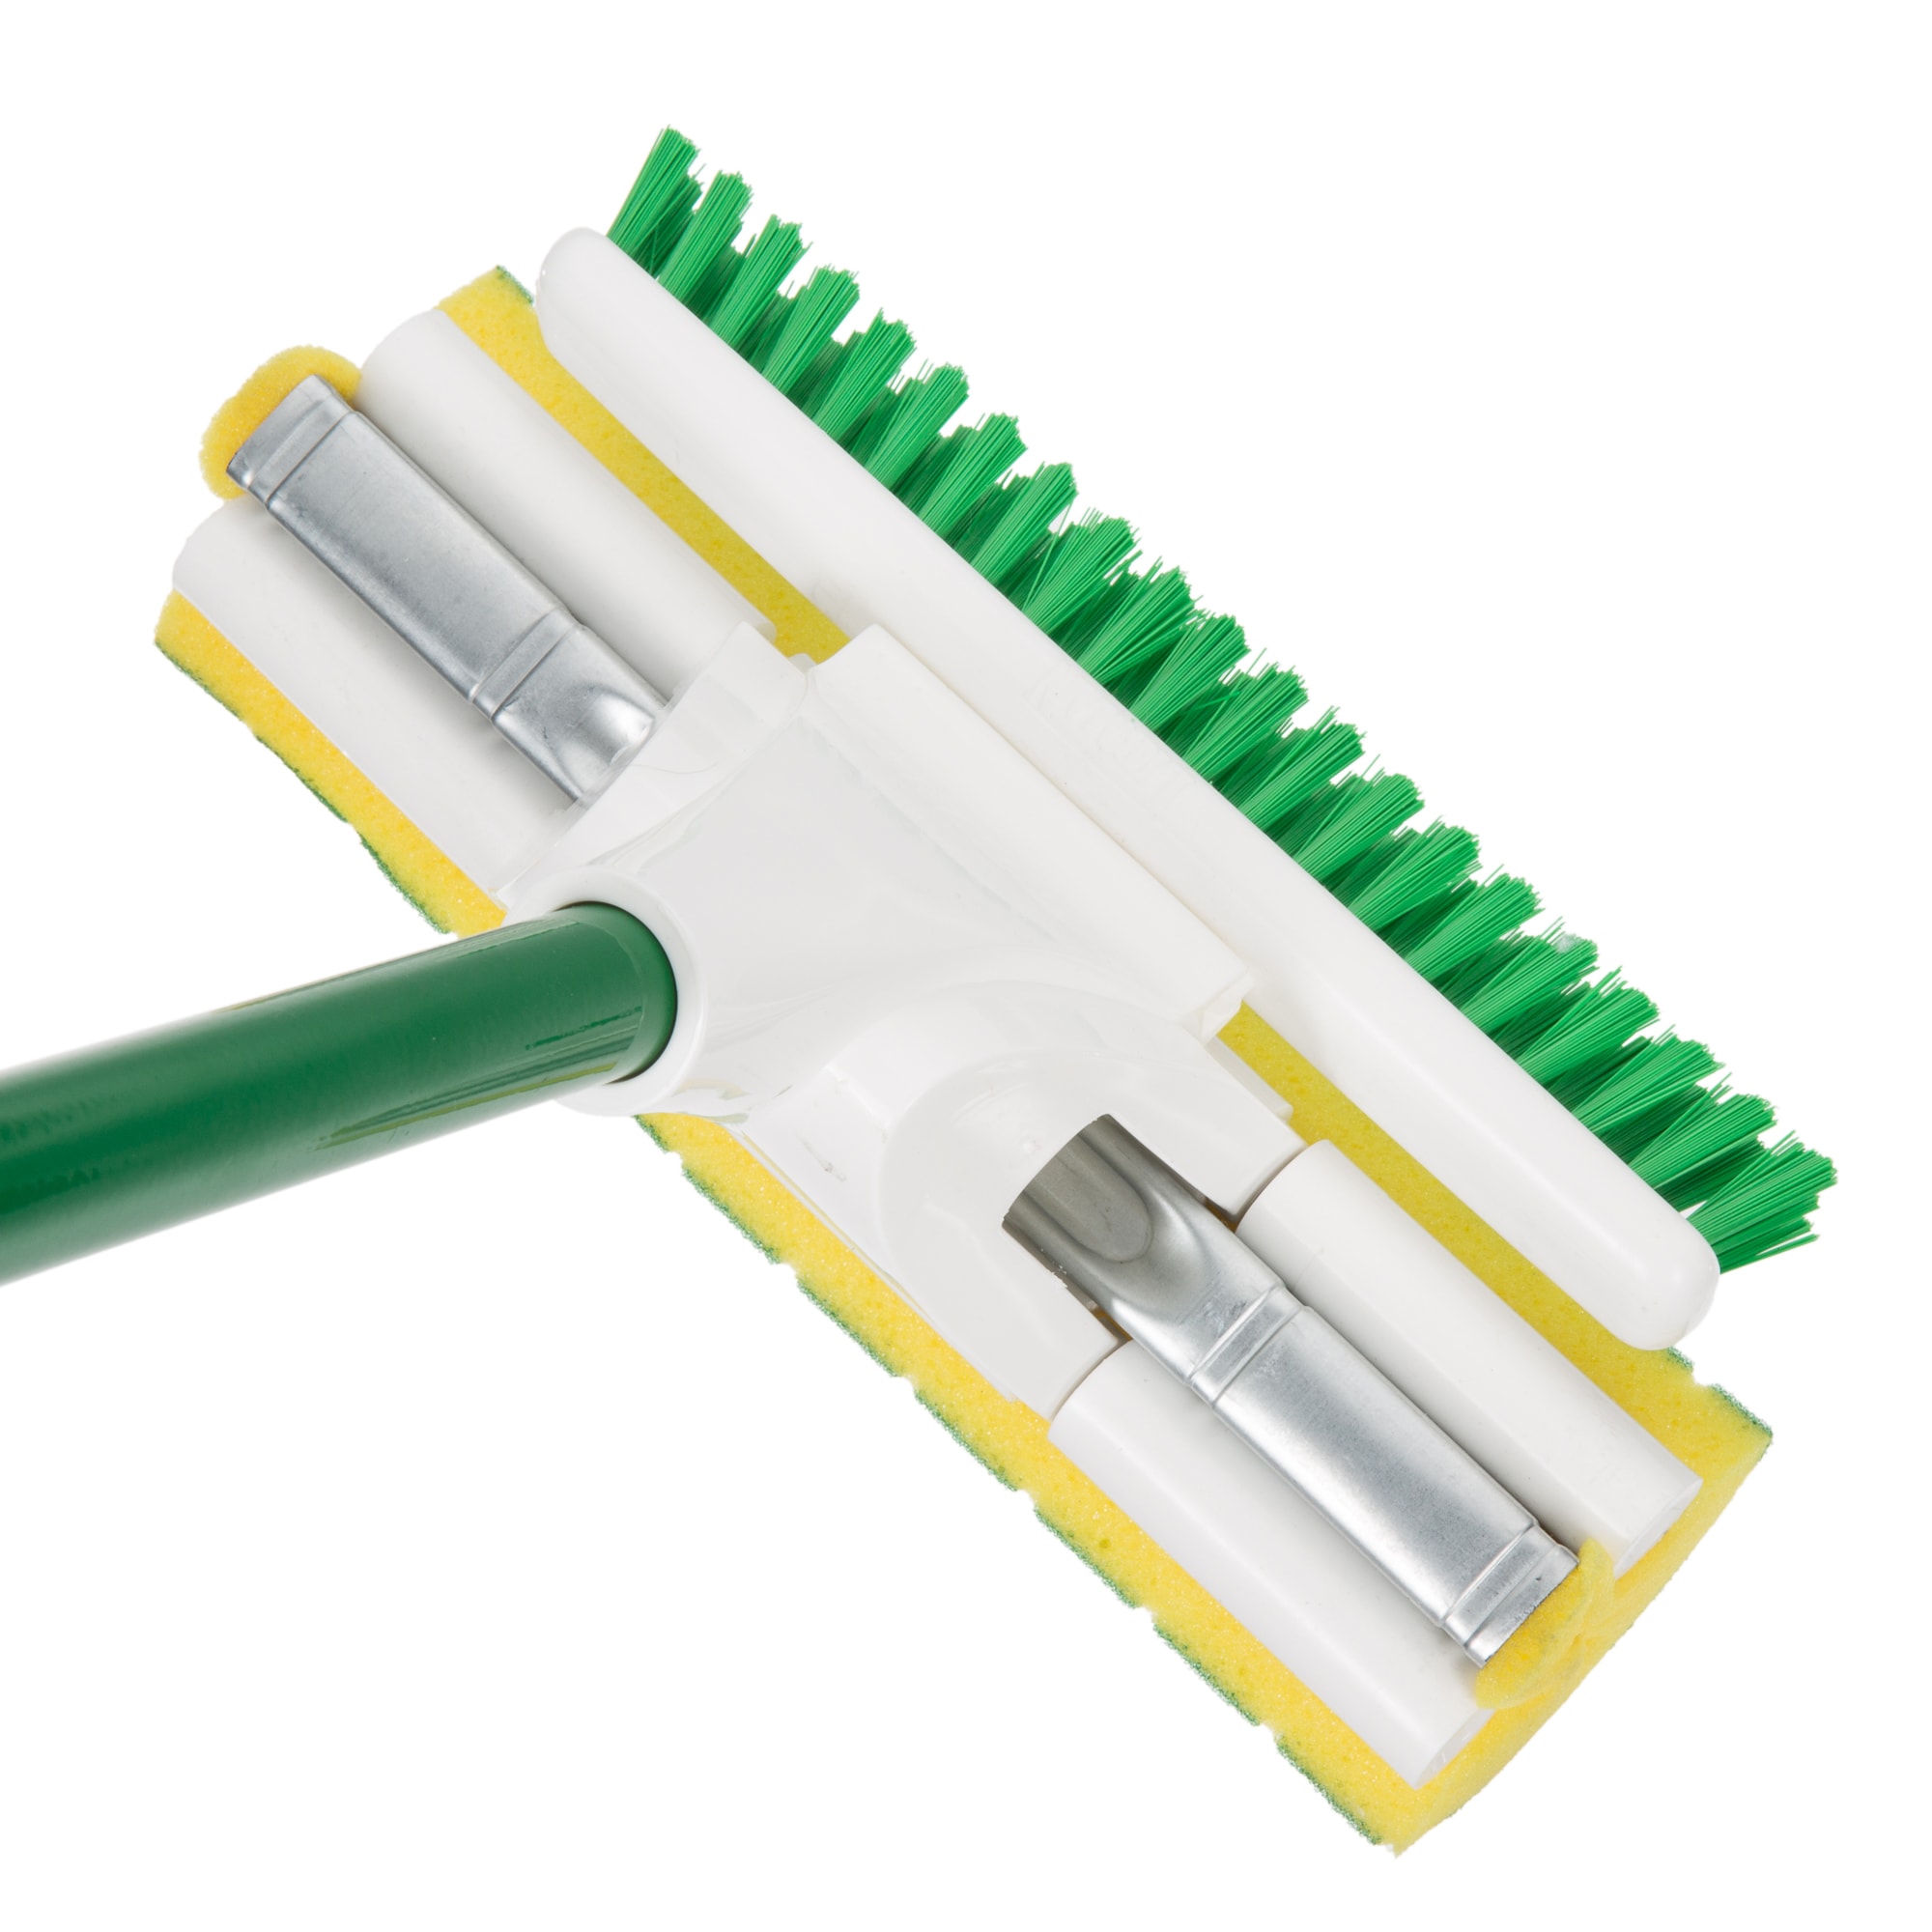 Libman Roller Mop with Scrub Brush, 4 Complete Mops (LIB-00955)